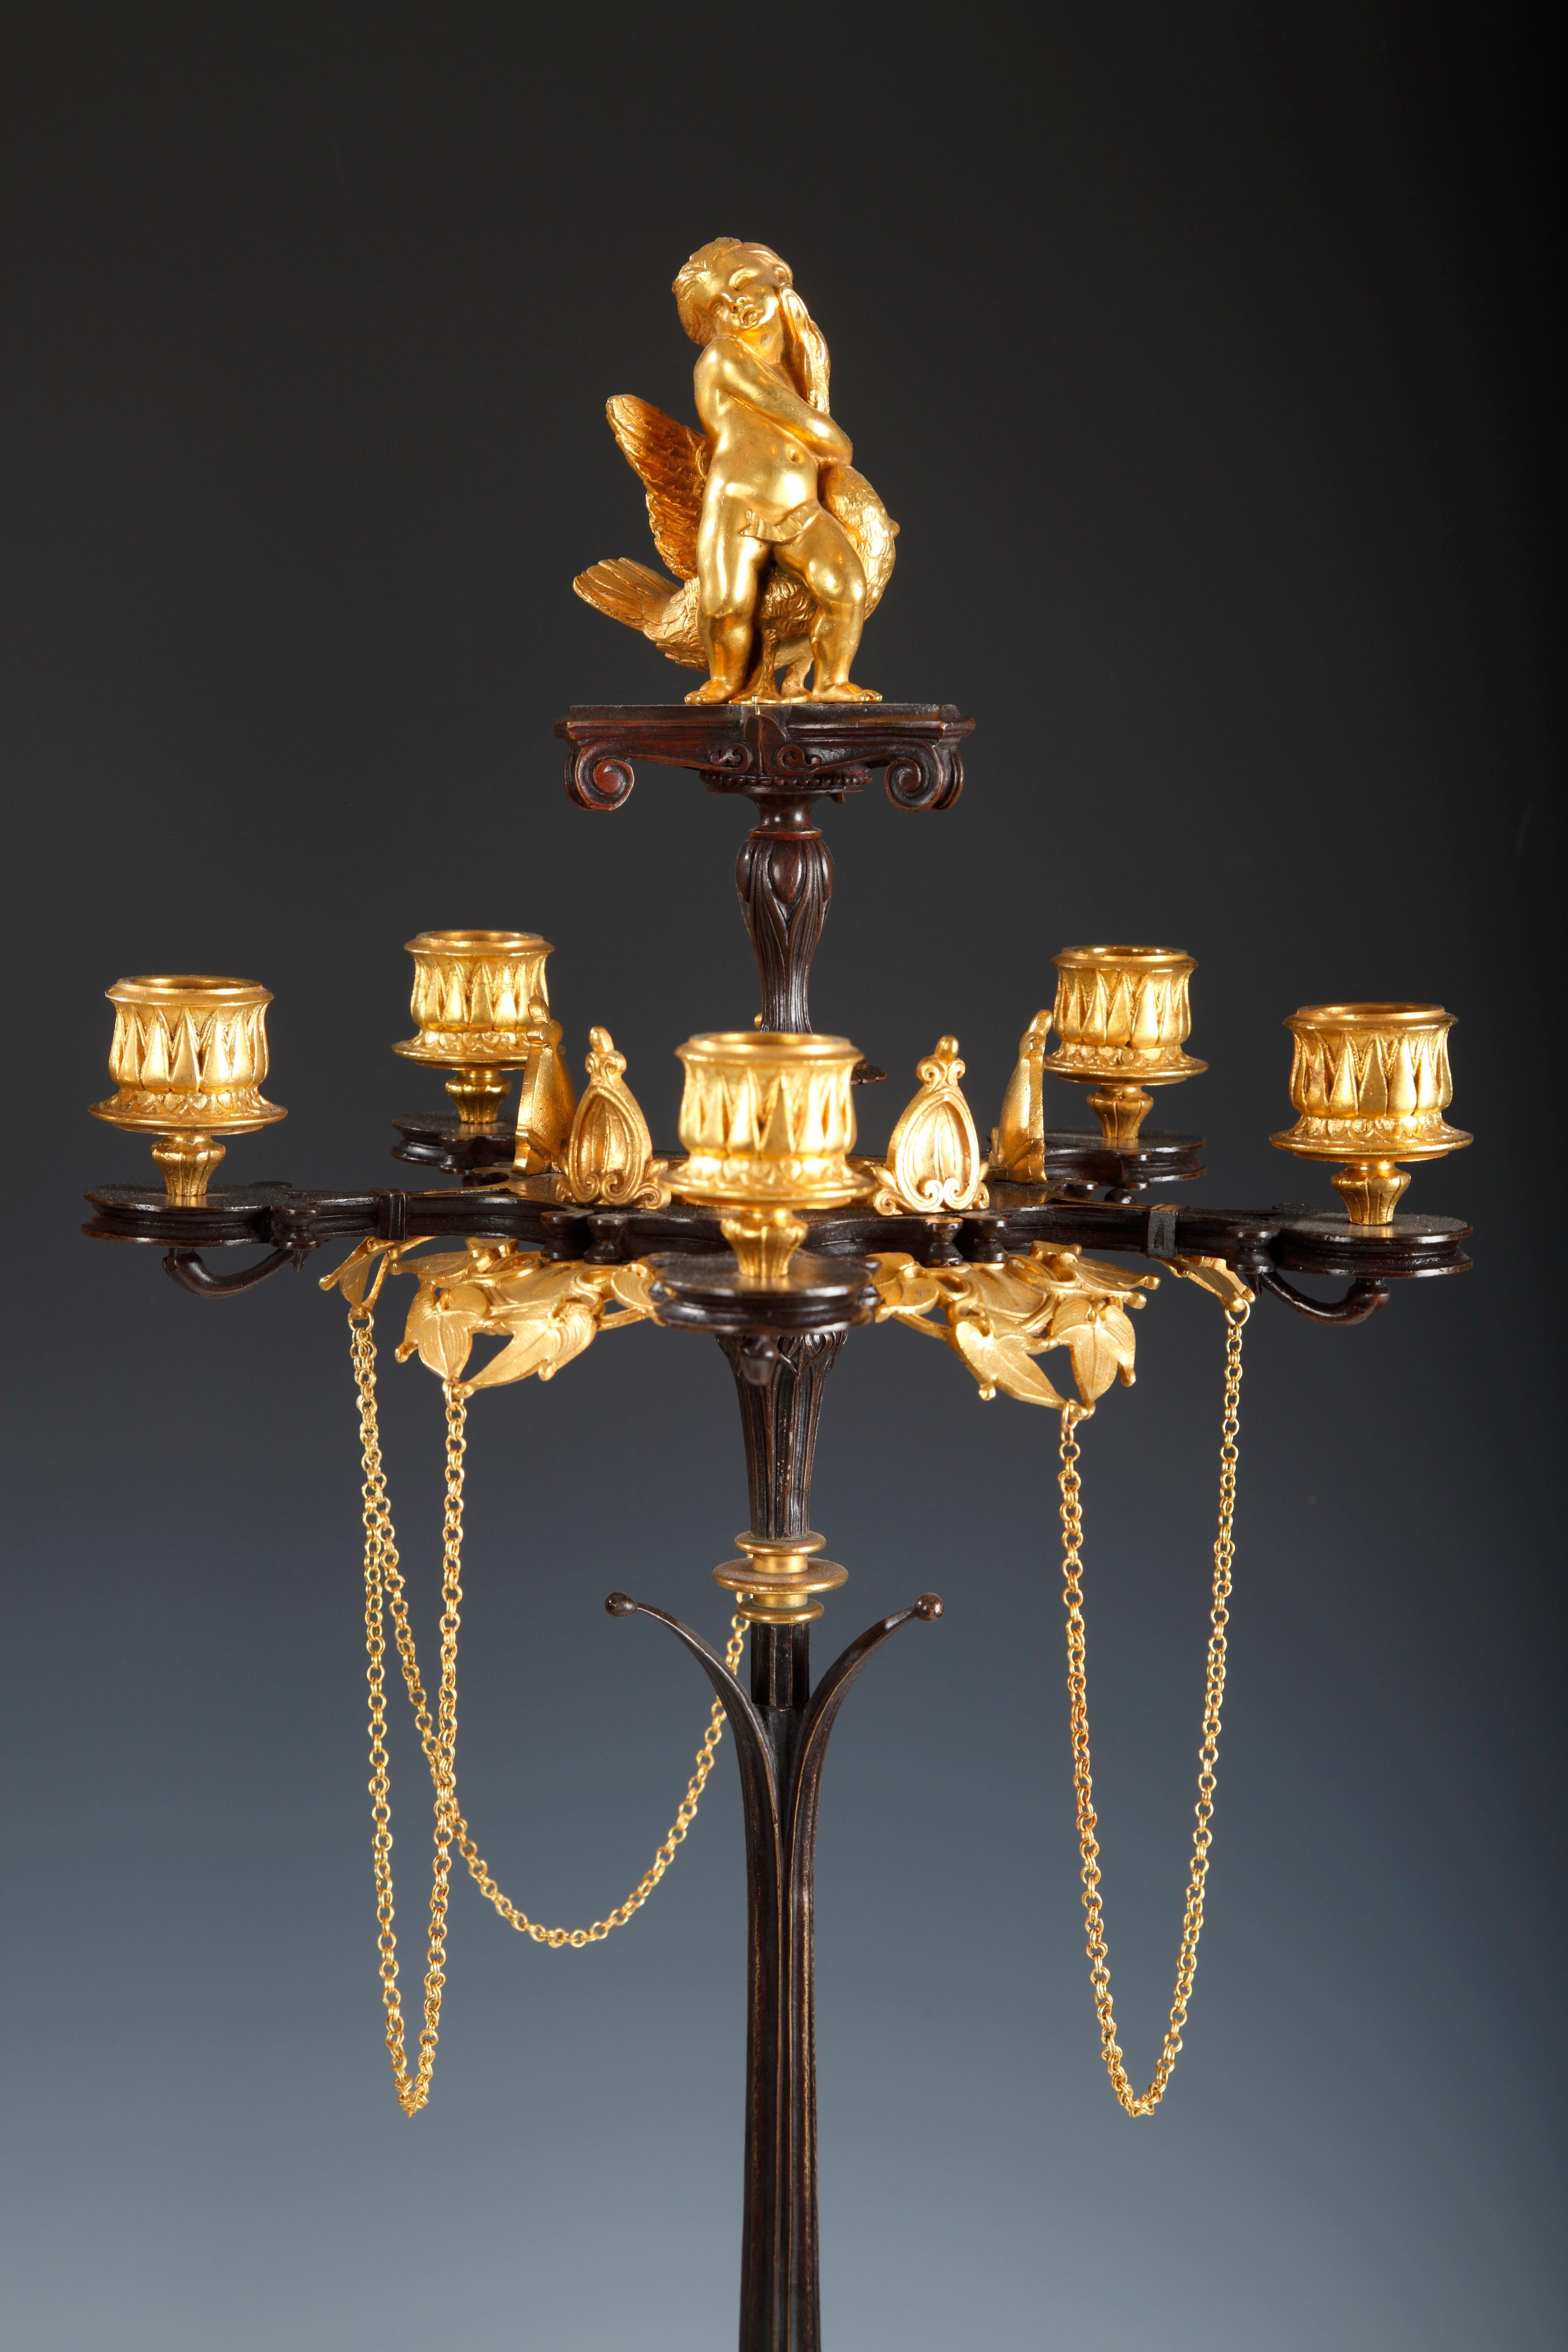 A very Fine pair of Greek style patinated and gilded bronze figural candelabras attributed to V. Paillard ; each presenting six light arms ornamented with ivy leaves and Fine chains, supported by a grooved stem and a tripod base decorated with